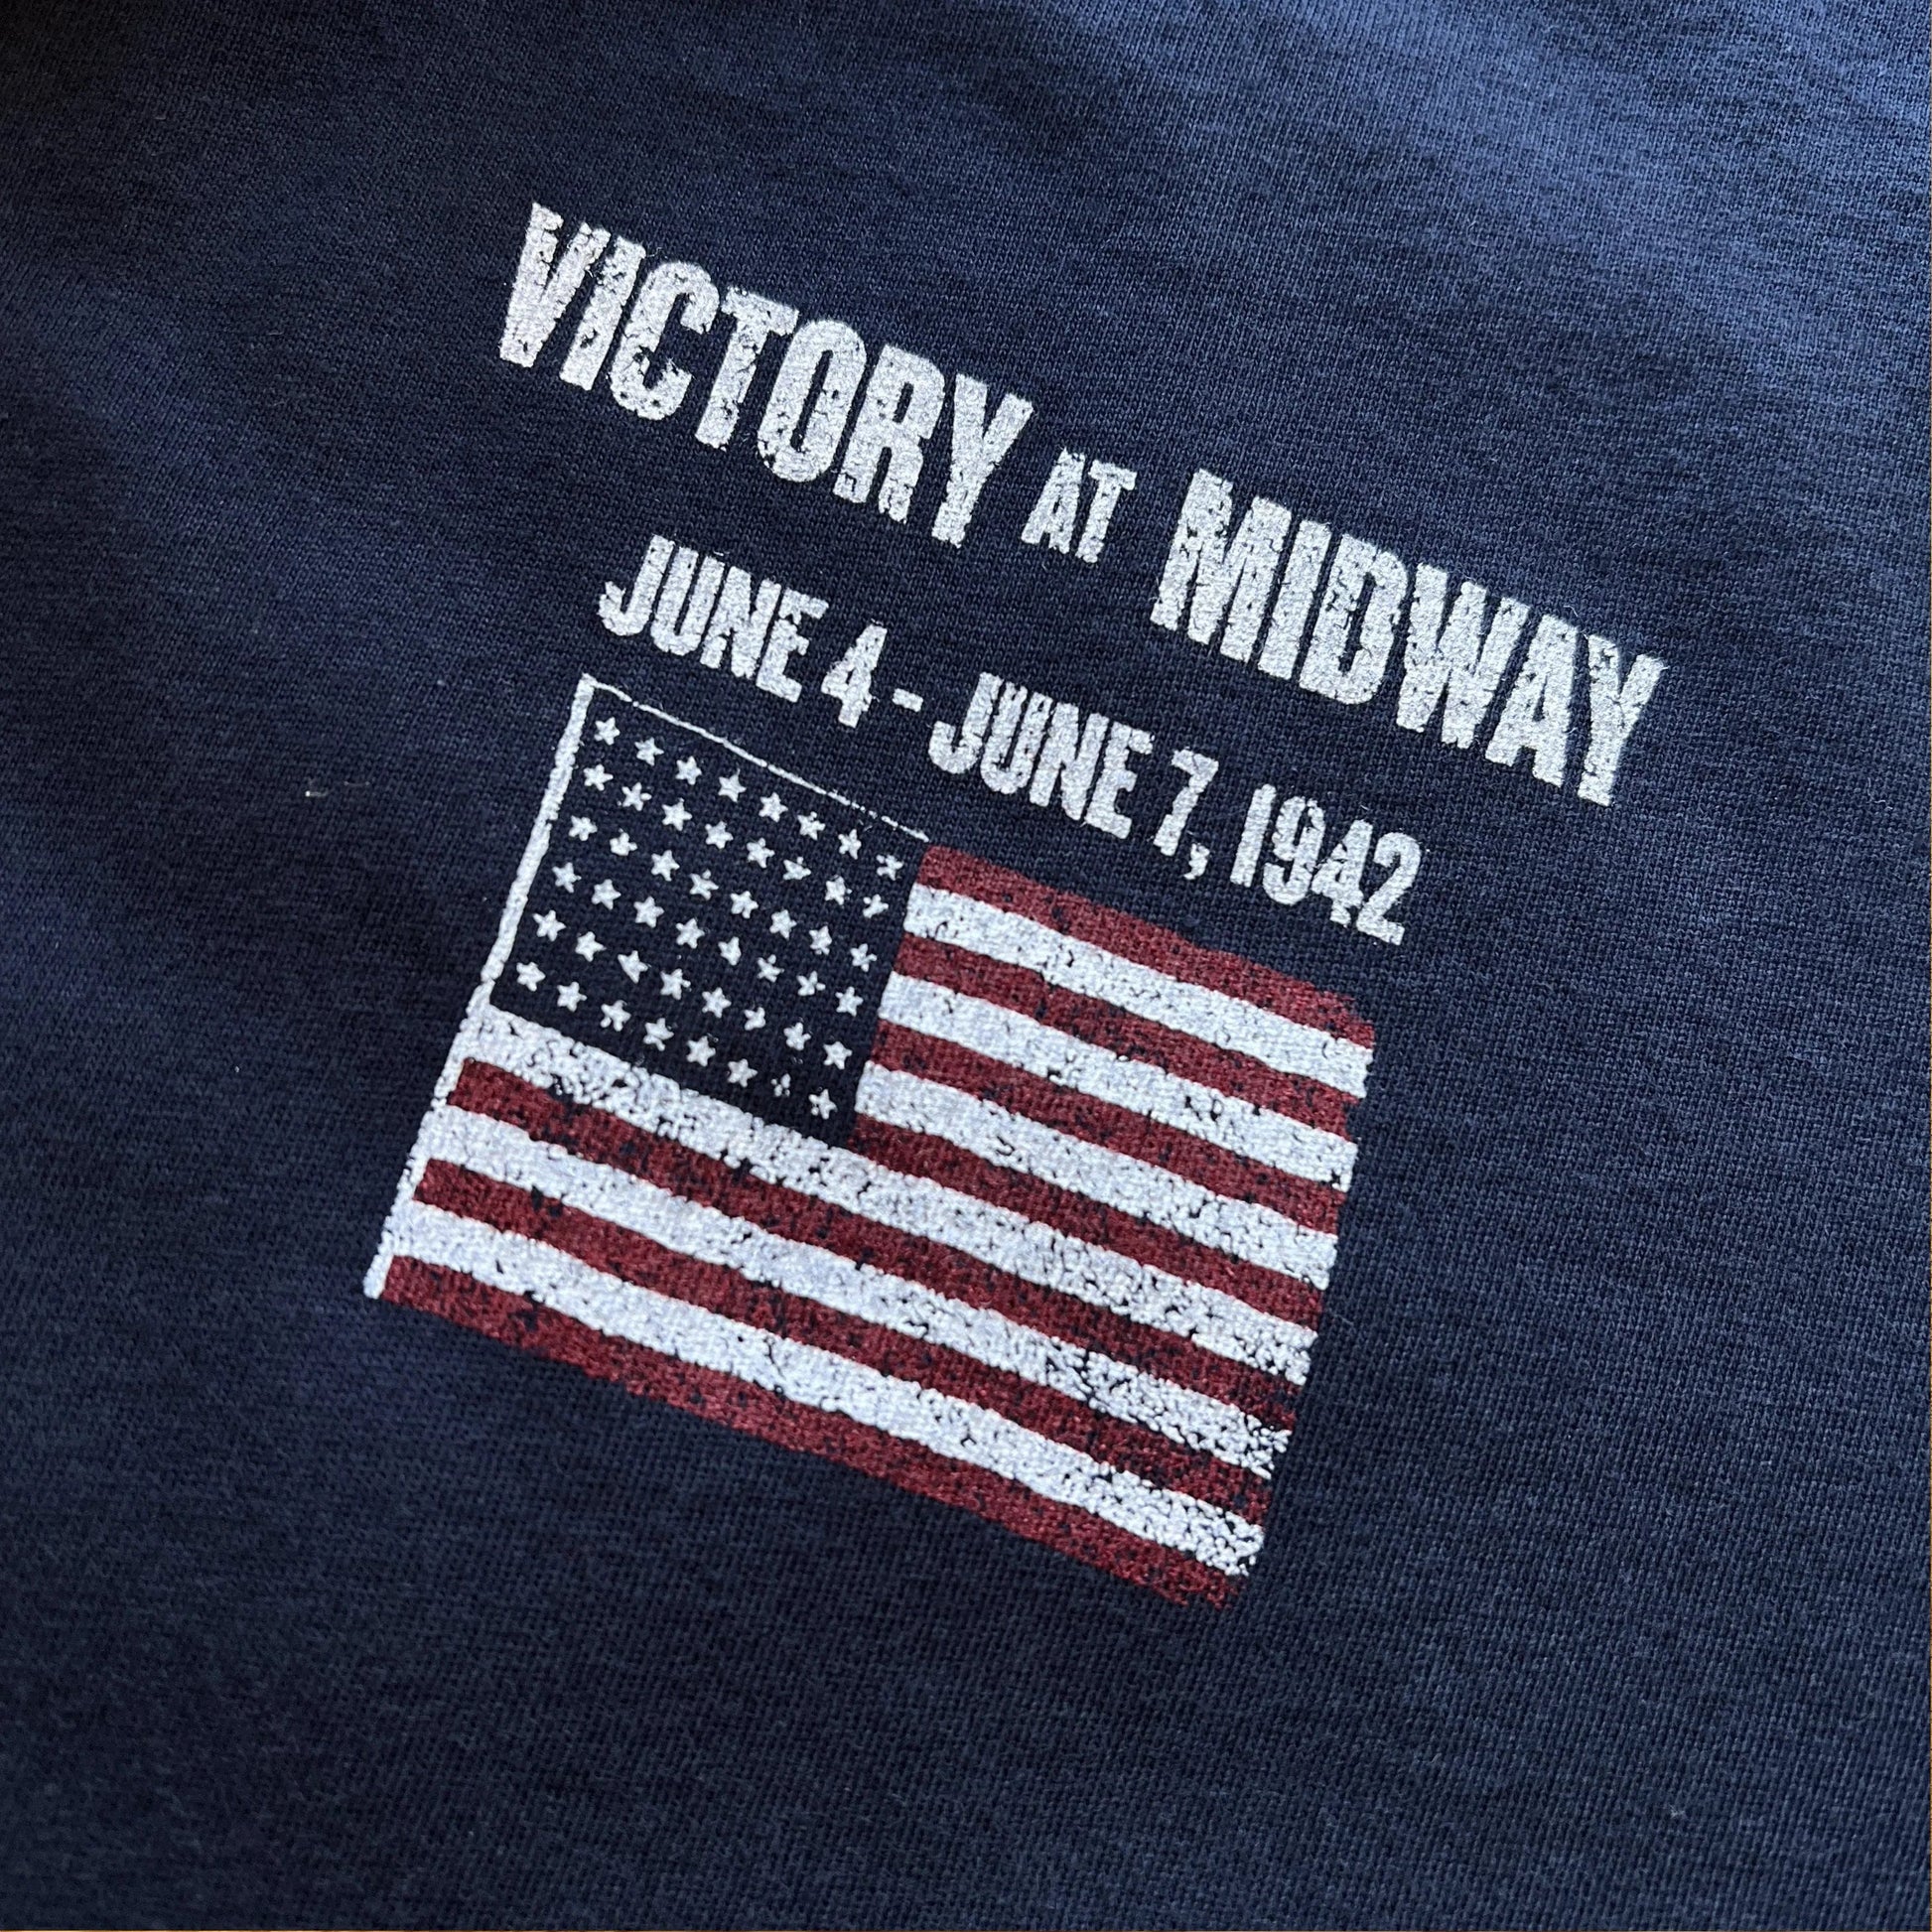 Front close-up of "Victory at Midway" Shirt from The History List store